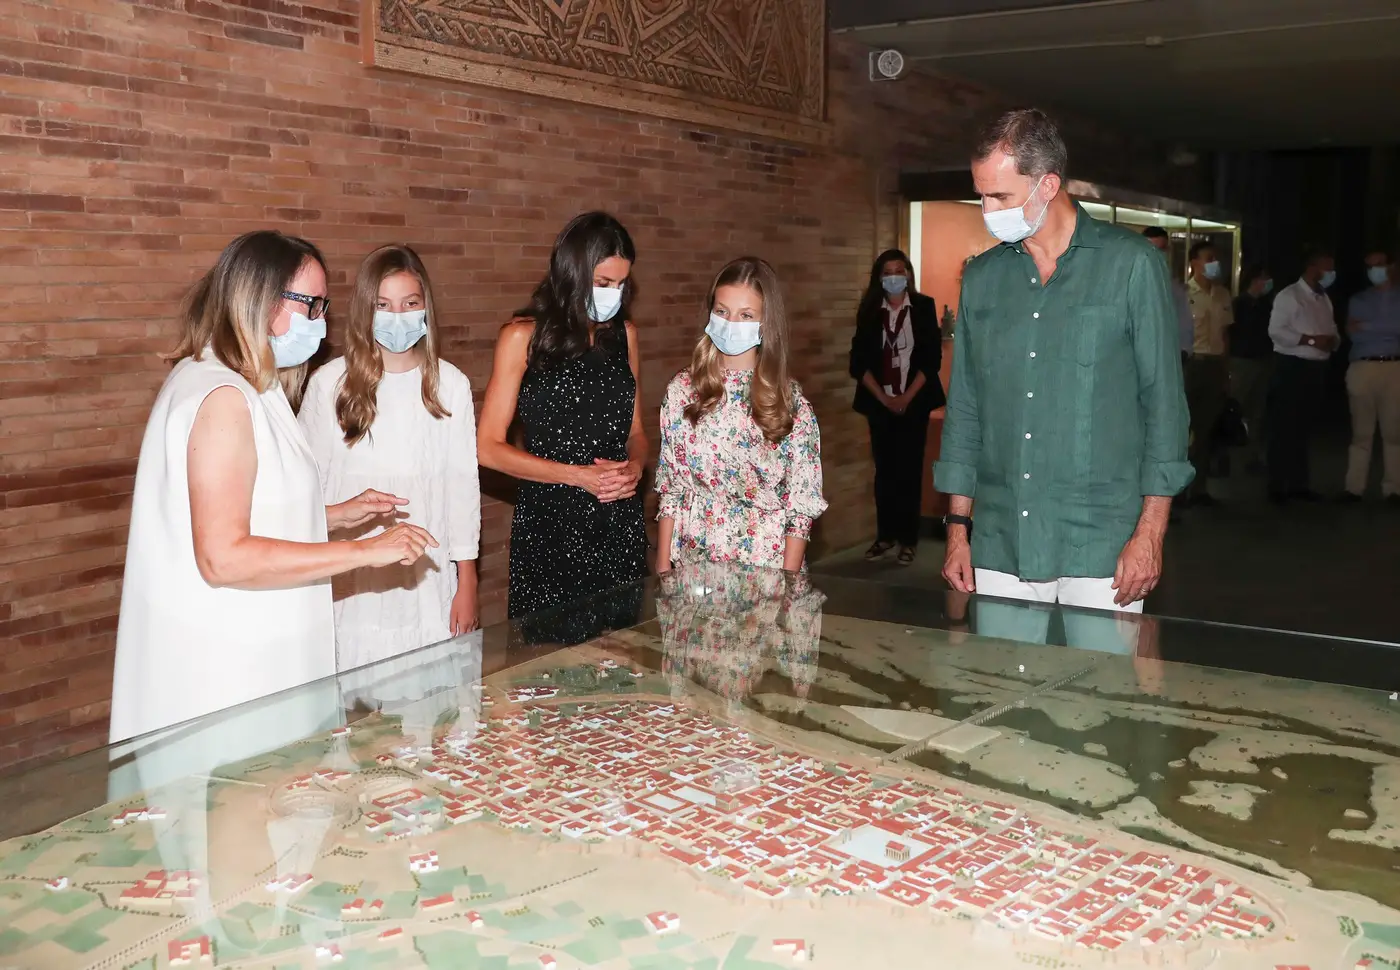 Spanish Royals visited the National Museum of Roman Art in Mérida